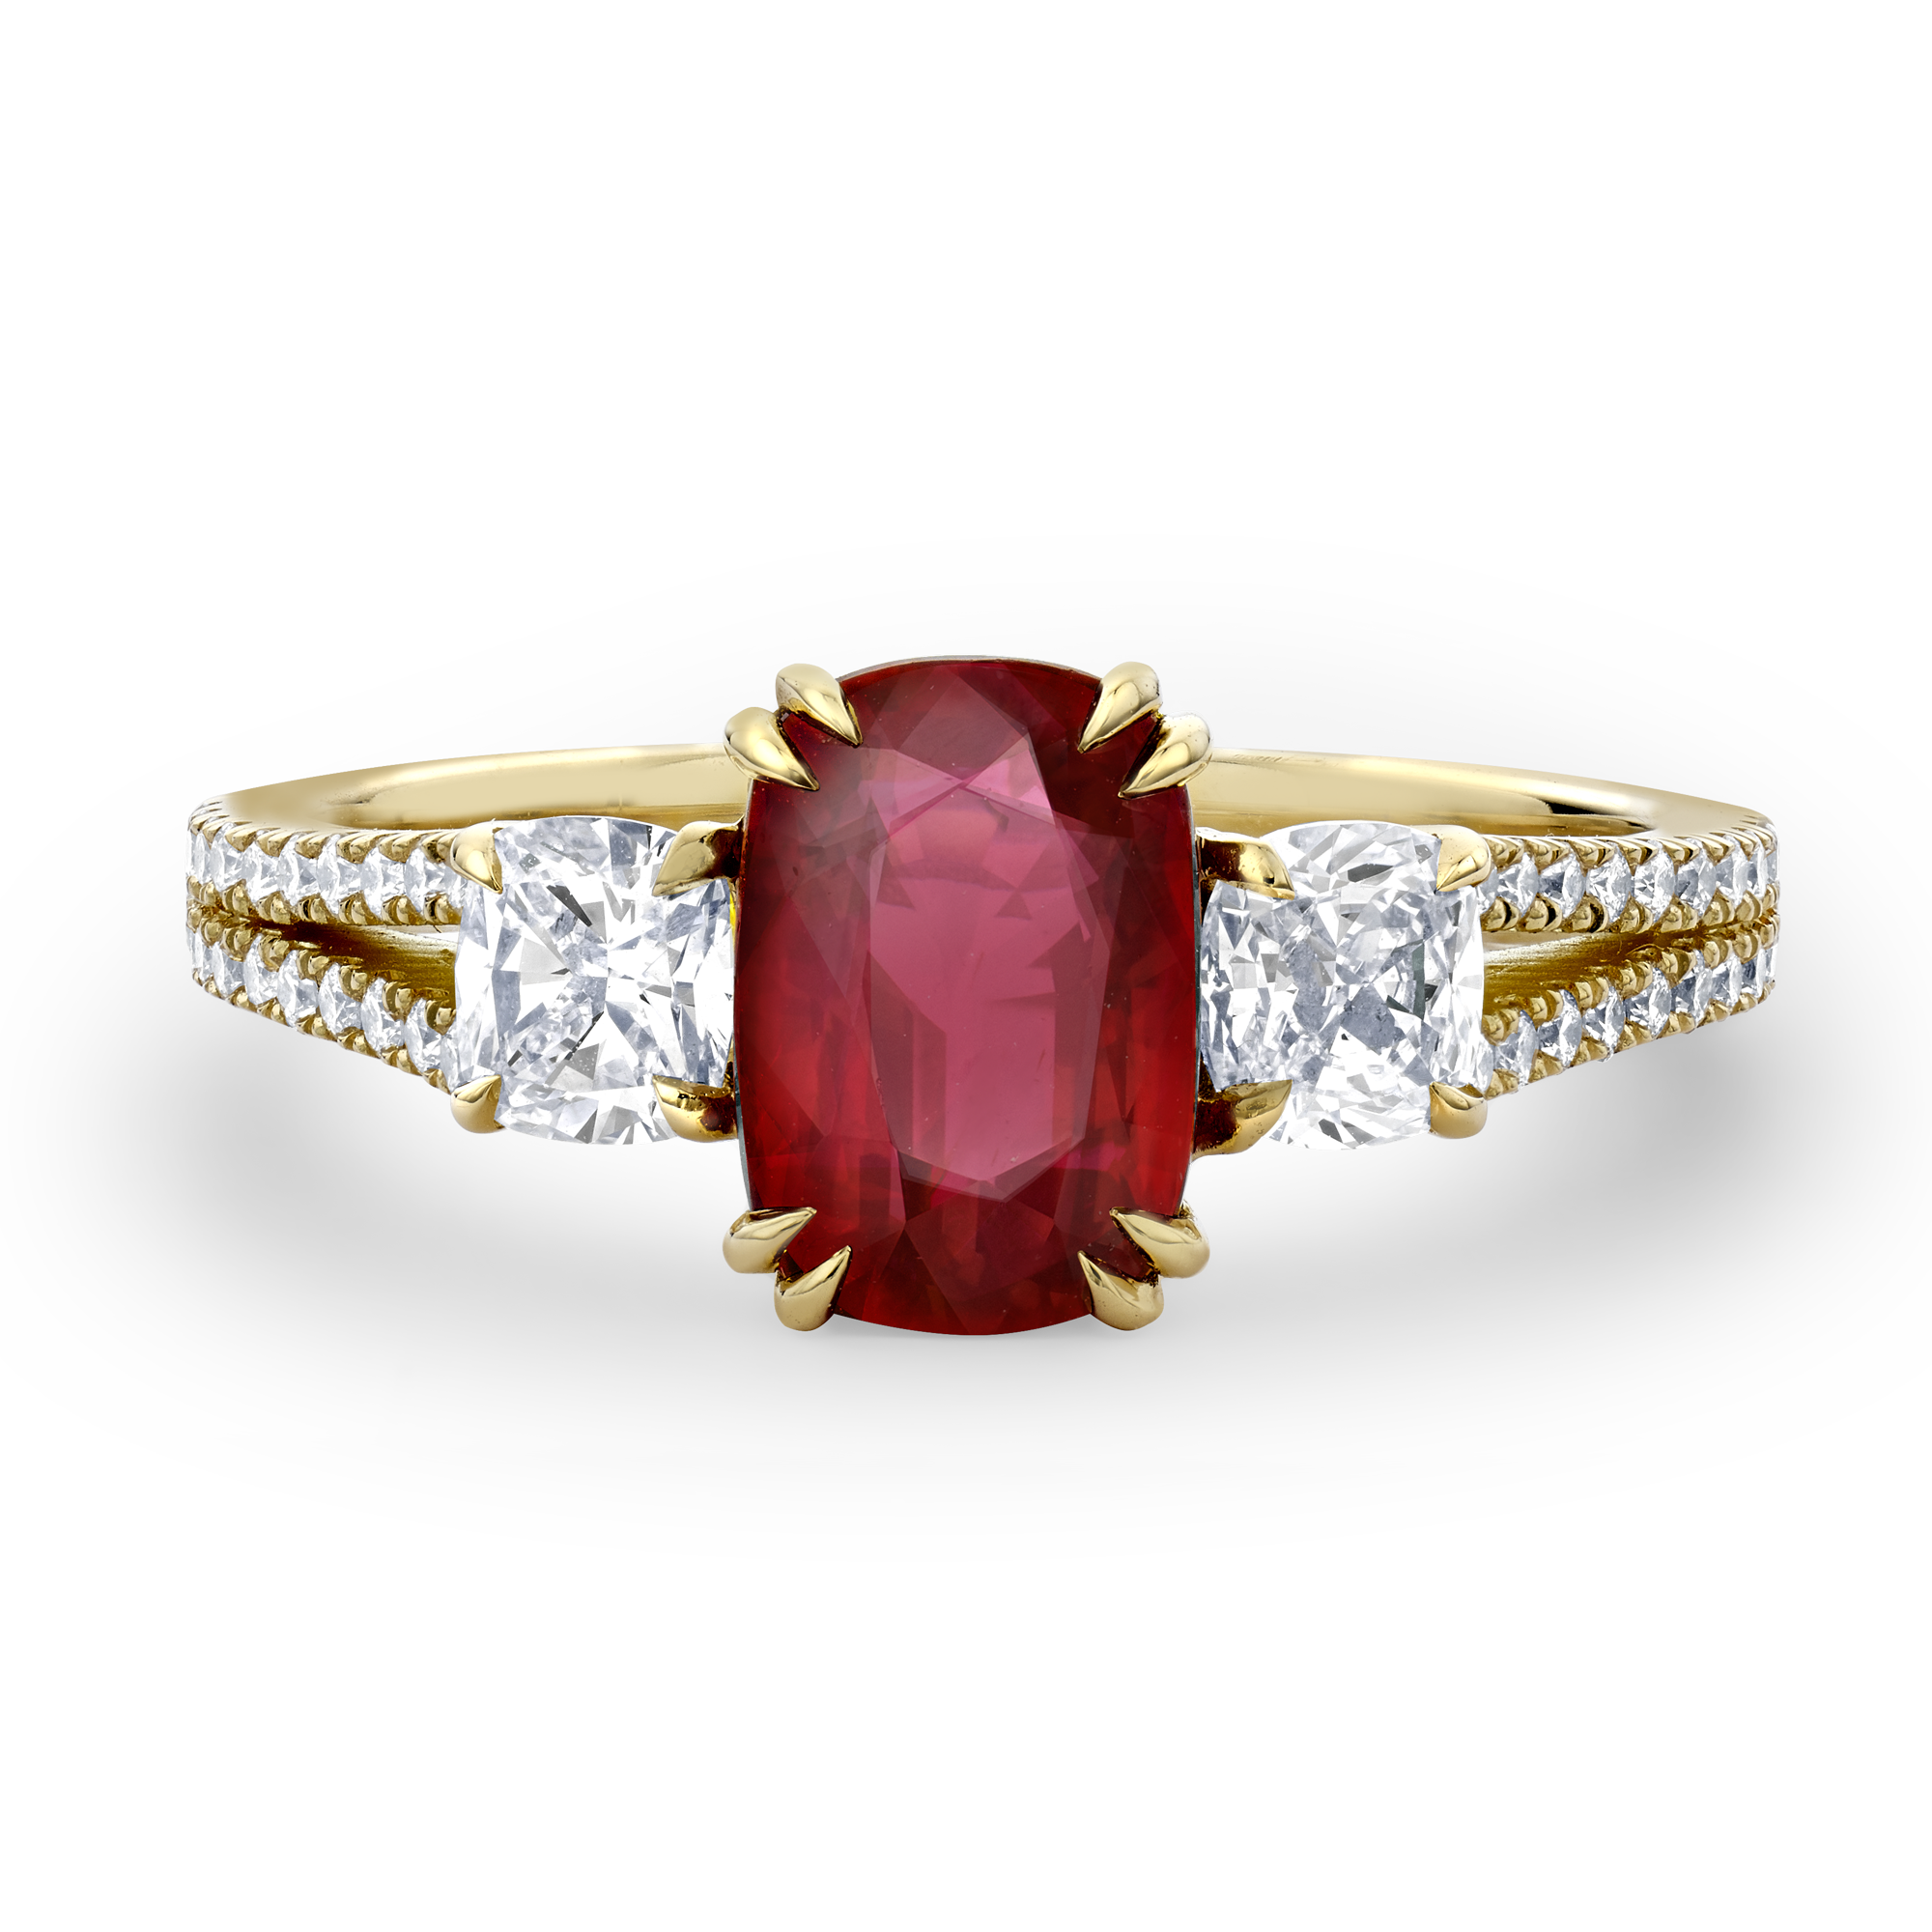 Mozambique 2.04ct Ruby and Diamond Three Stone Ring Cushion Cut, Claw Set_2